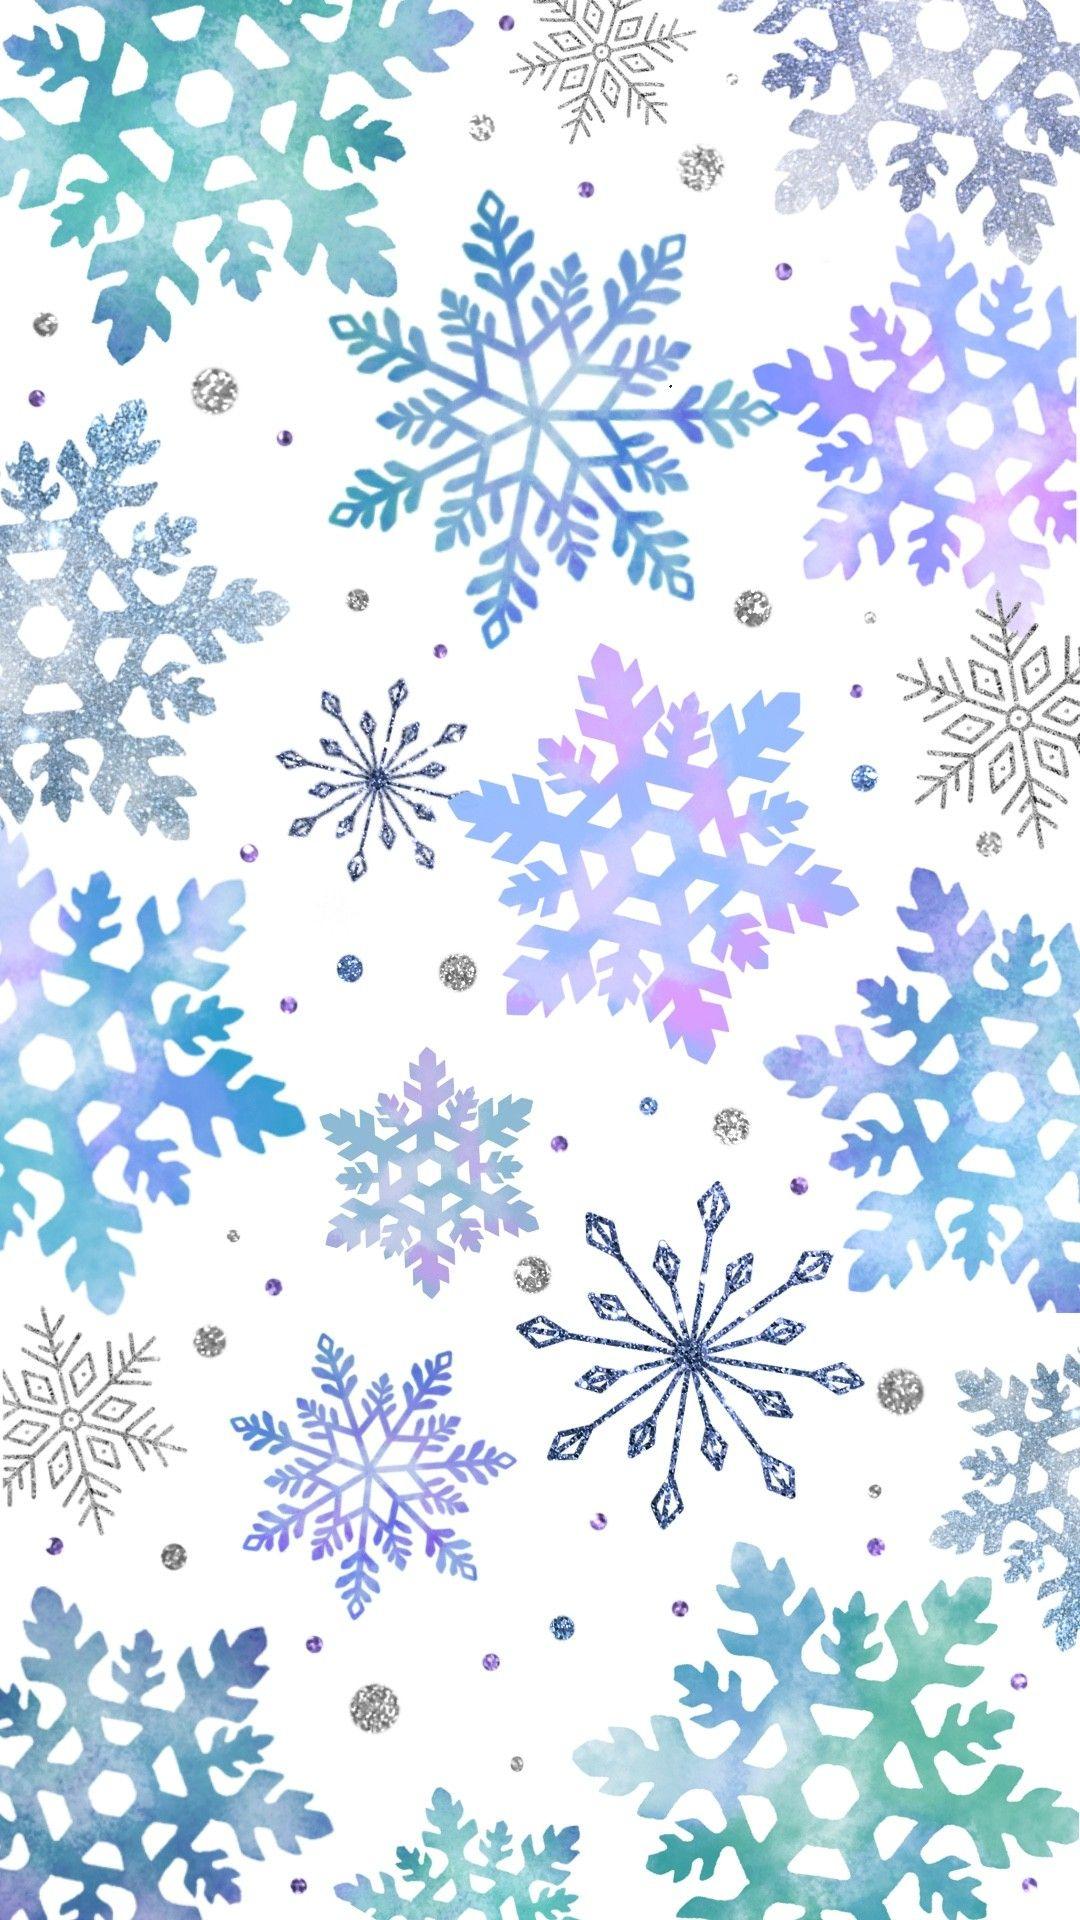 Seamless Pattern with Black Snowflakes on White Background Flat Line  Snowing Icons Cute Snow Flakes Repeat Wallpaper Stock Vector   Illustration of christmas design 128793524